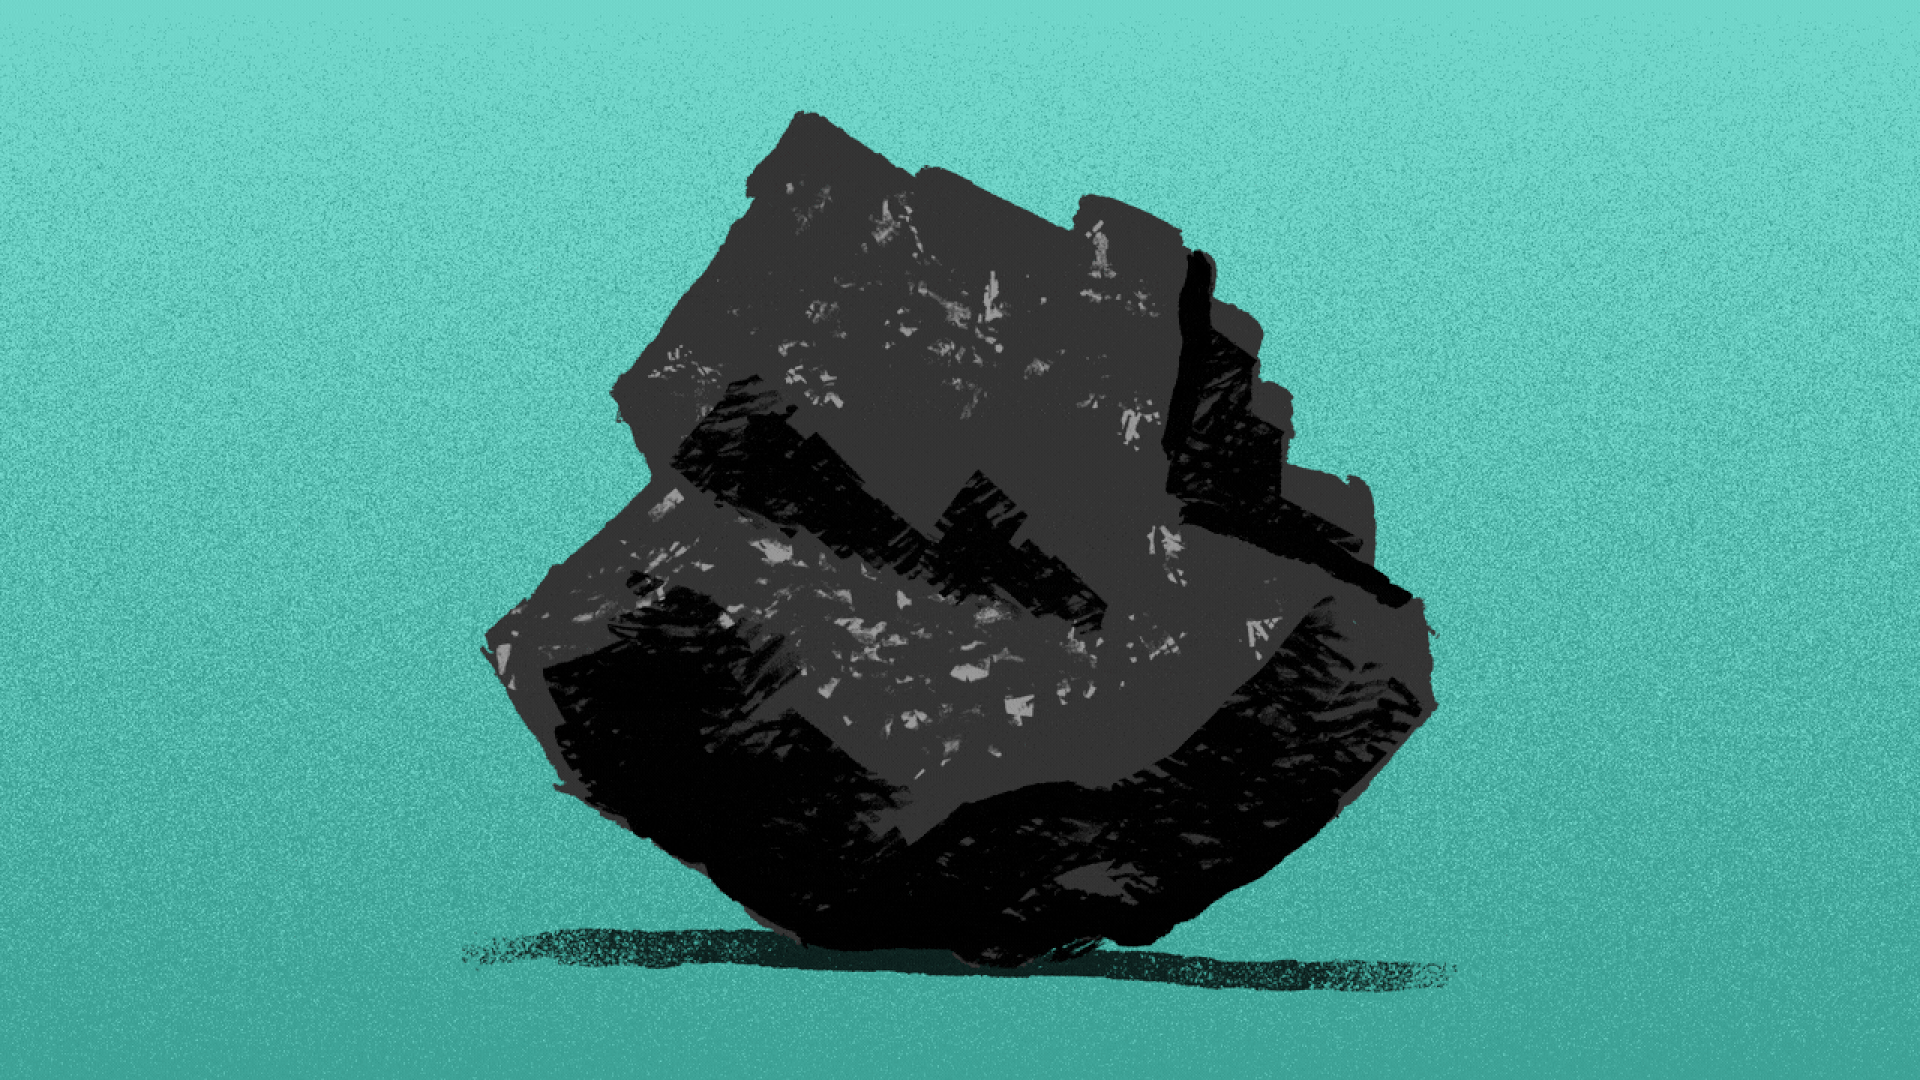 Illustration of a piece of coal crumbling.